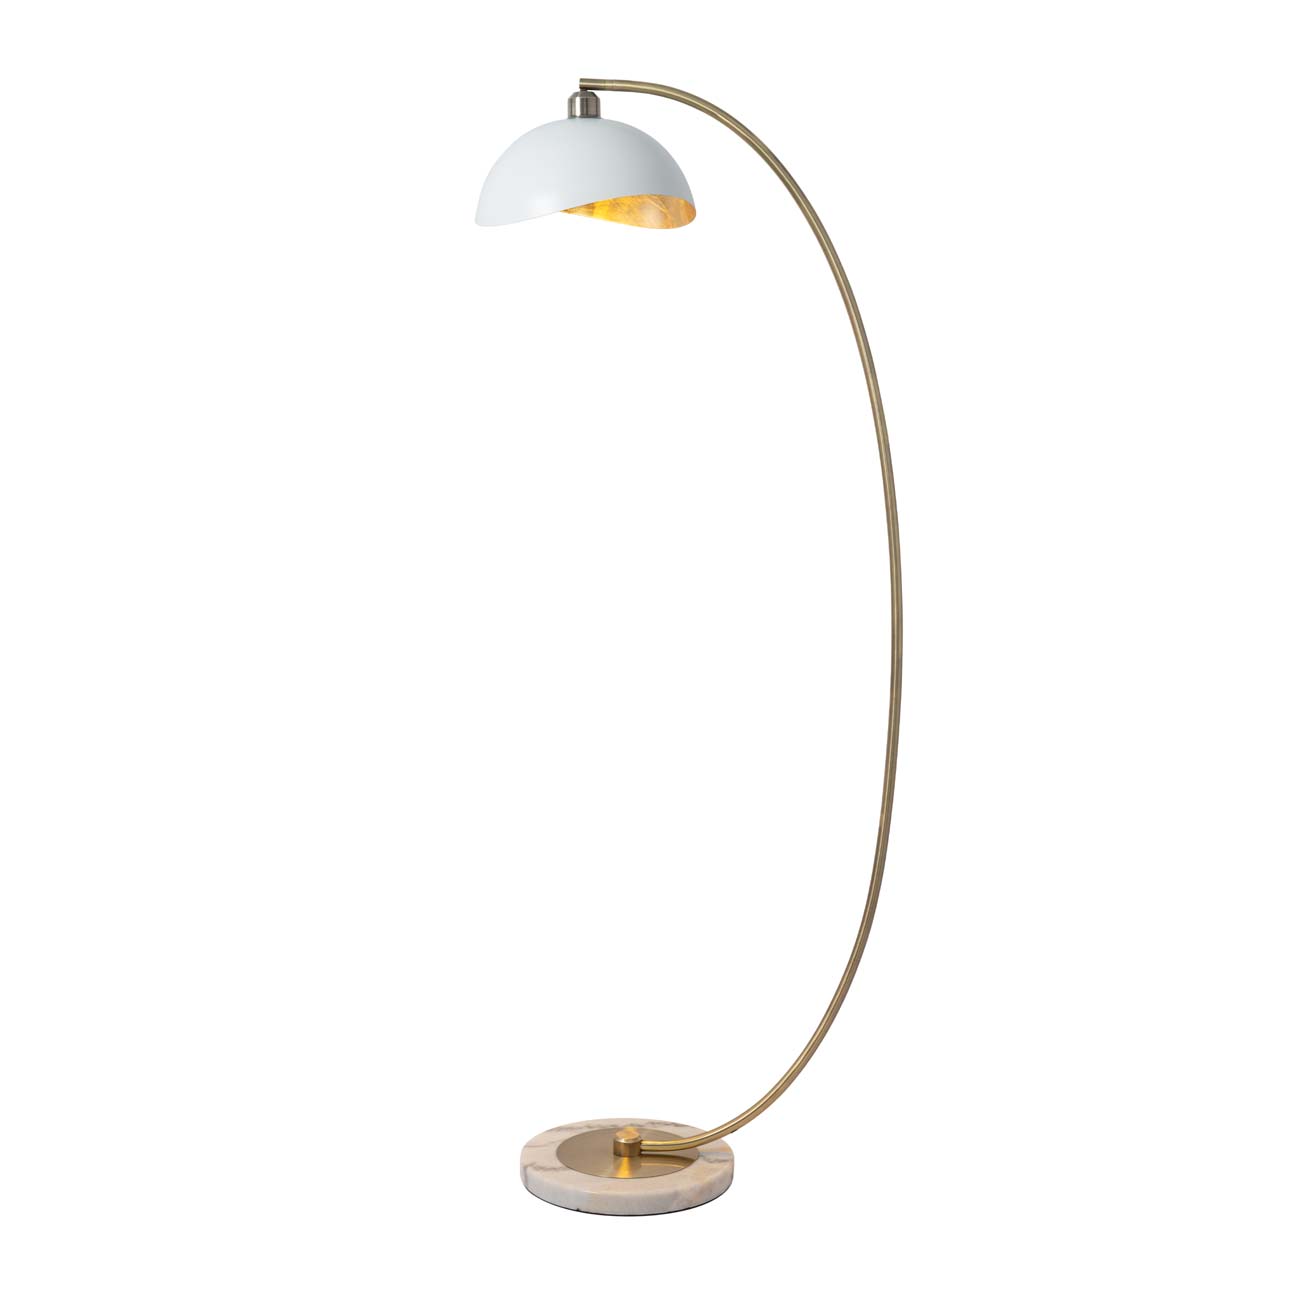 Luna Bella 60″ Chair Side Arc Lamp in Weathered Brass with Matte White/Gold  Leaf Shade and On/Off Step Switch